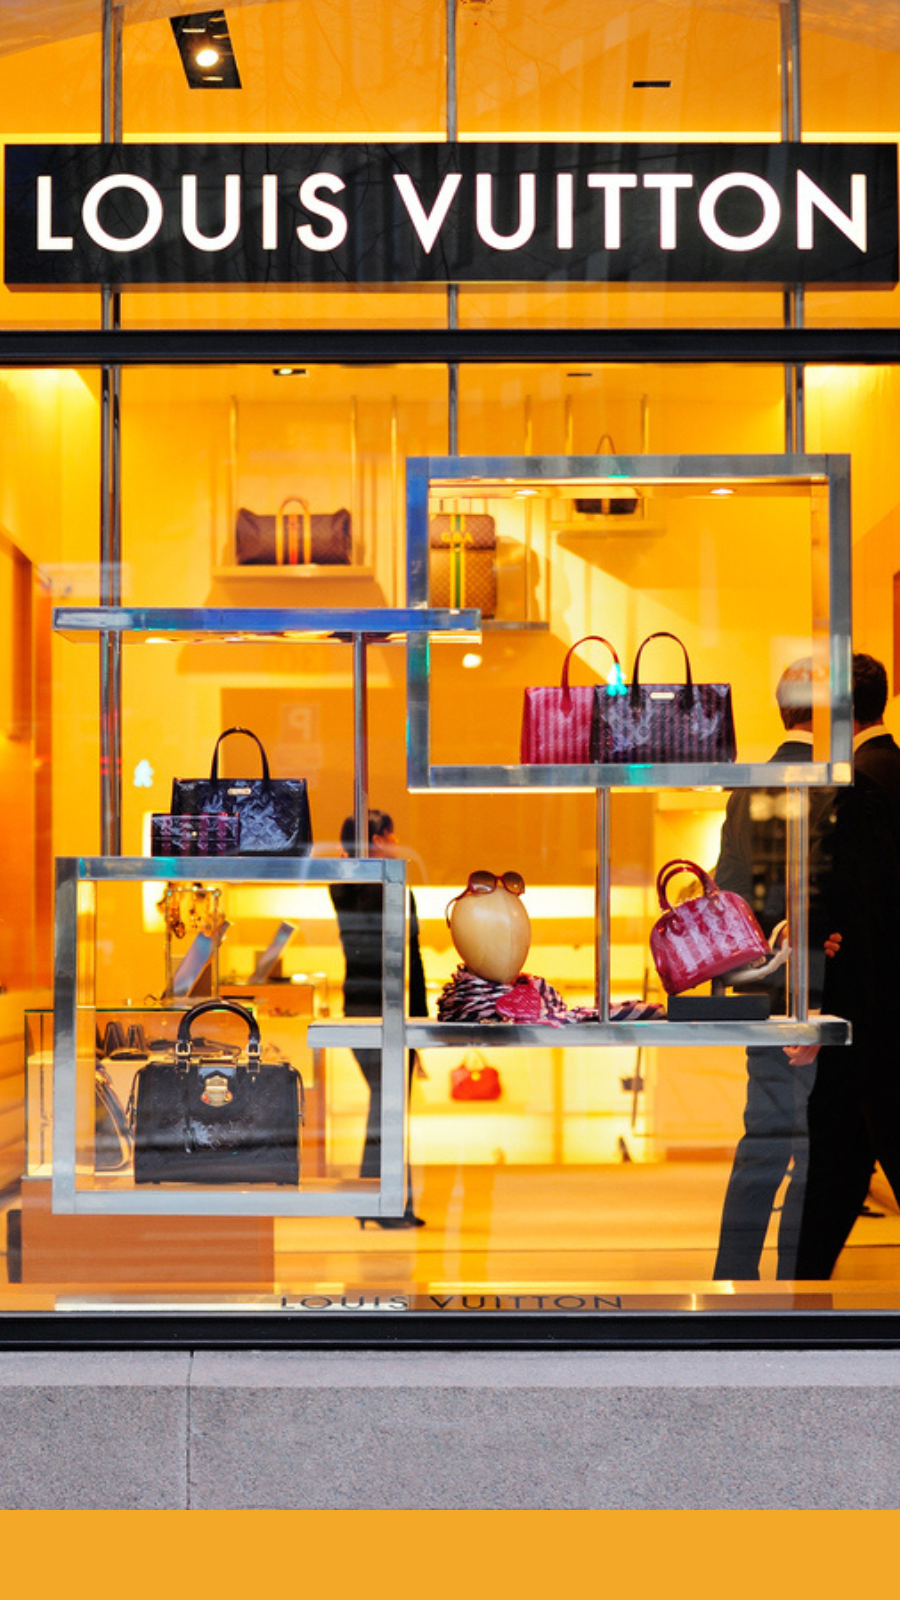 Louis Vuitton Releases an Art Book on Its Window Displays